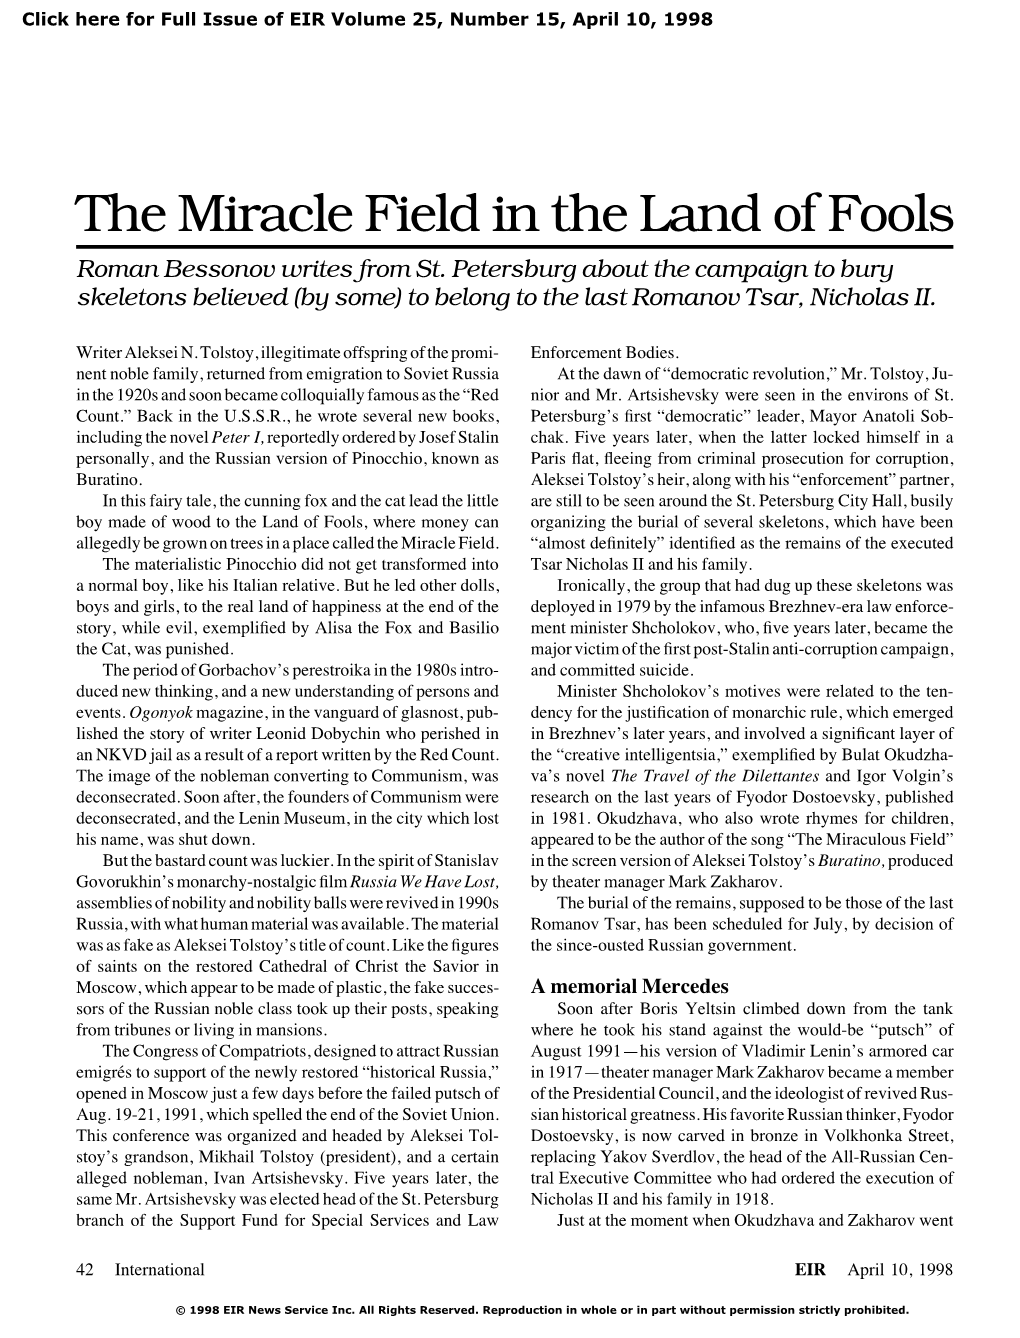 The Miracle Field in the Land of Fools Roman Bessonov Writes from St